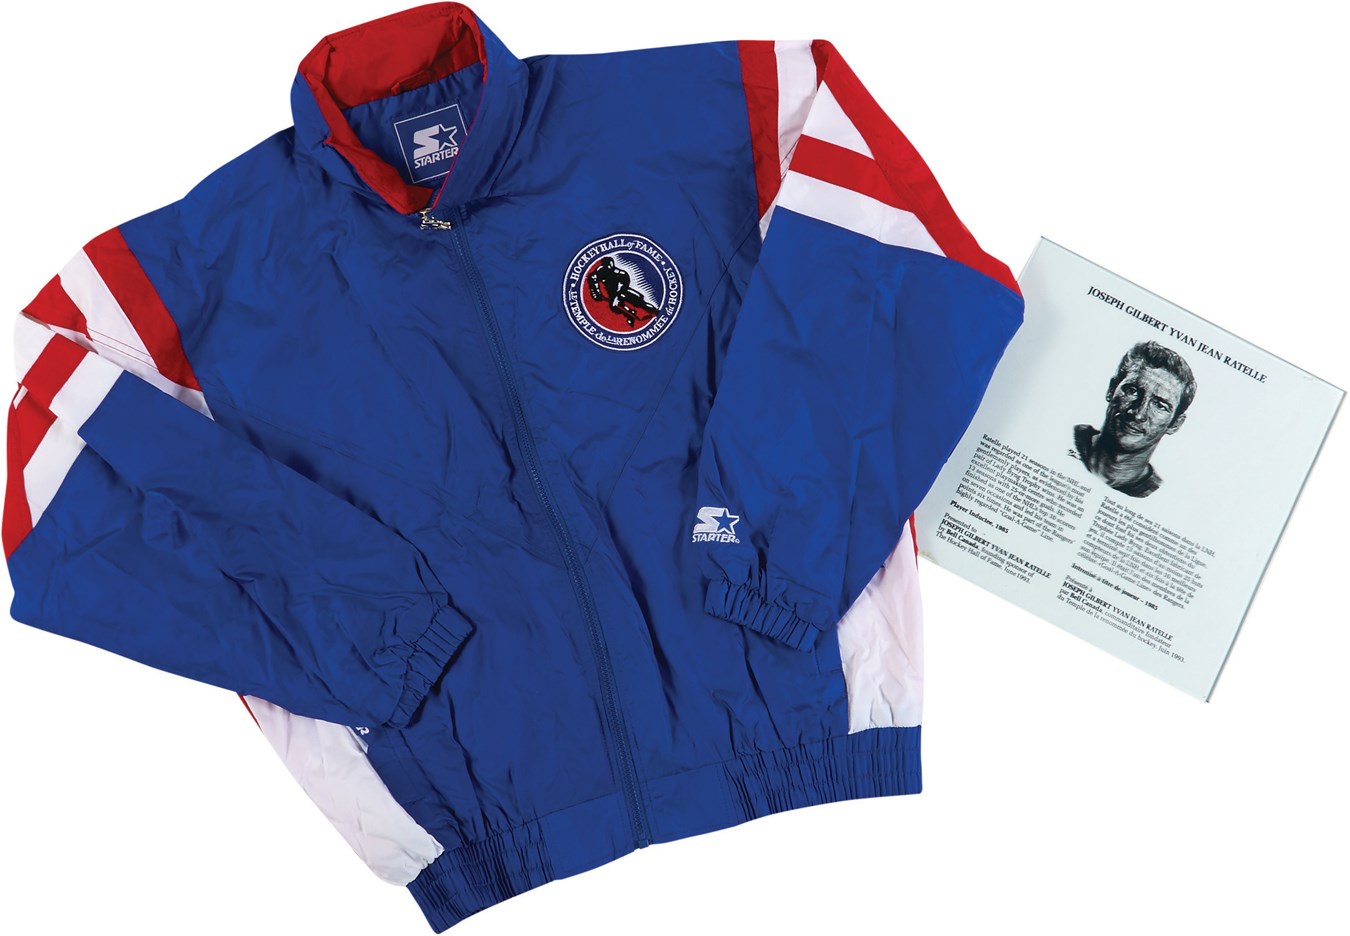 Jean Ratelle Hockey Hall of Fame Plaque and Jacket